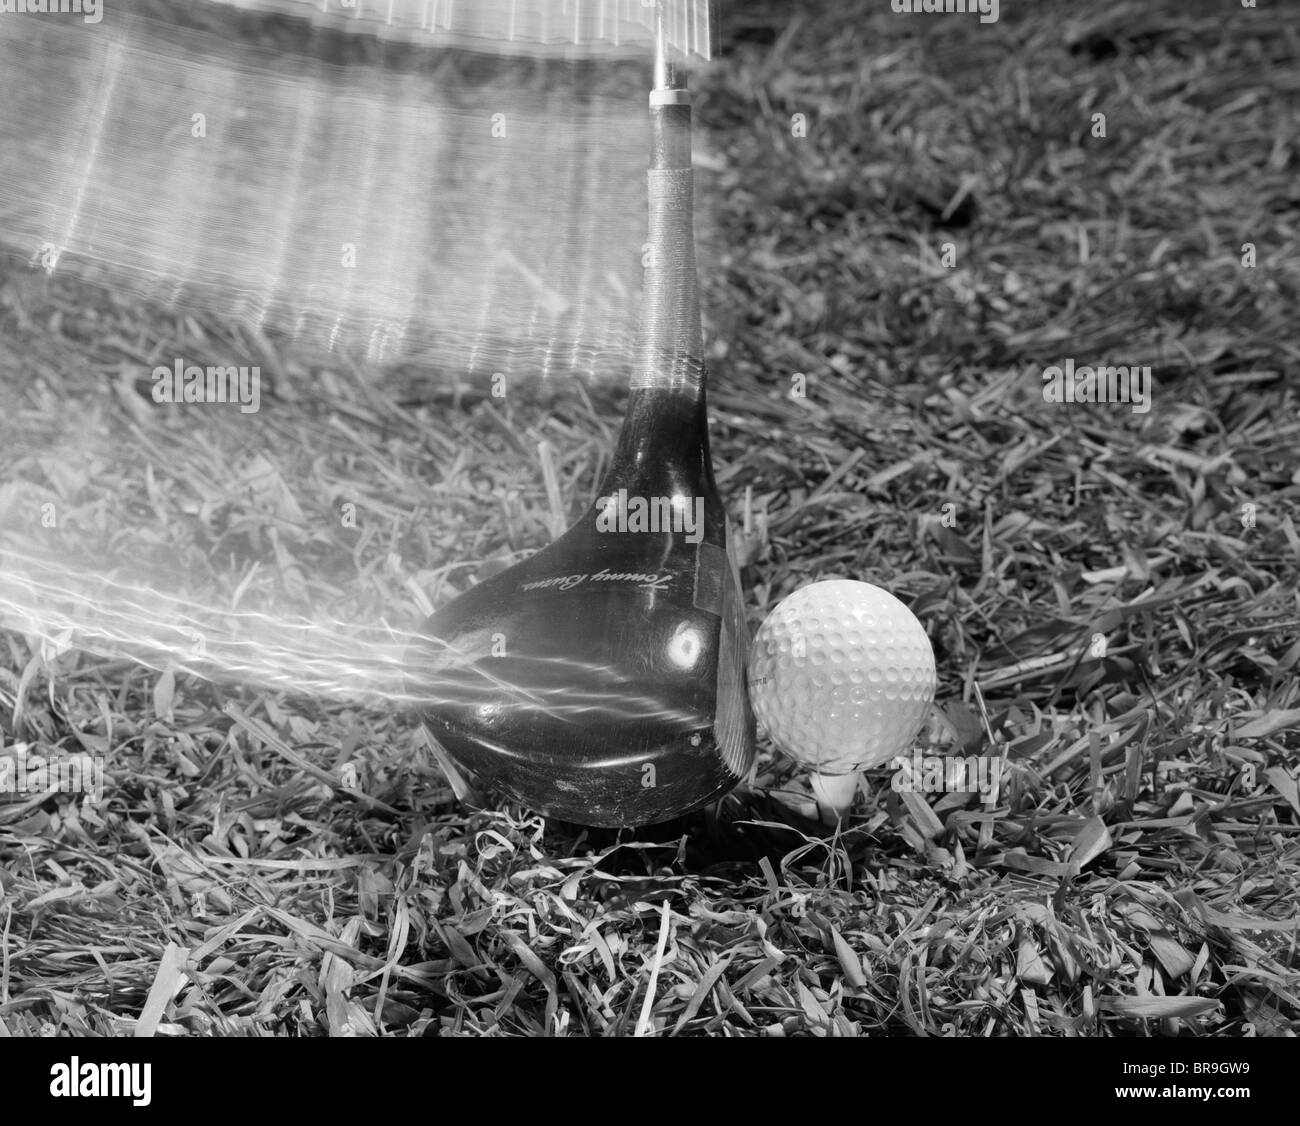 1960s MOVING DRIVER GOLF CLUB HITTING BALL ON TEE IN GRASS Stock Photo